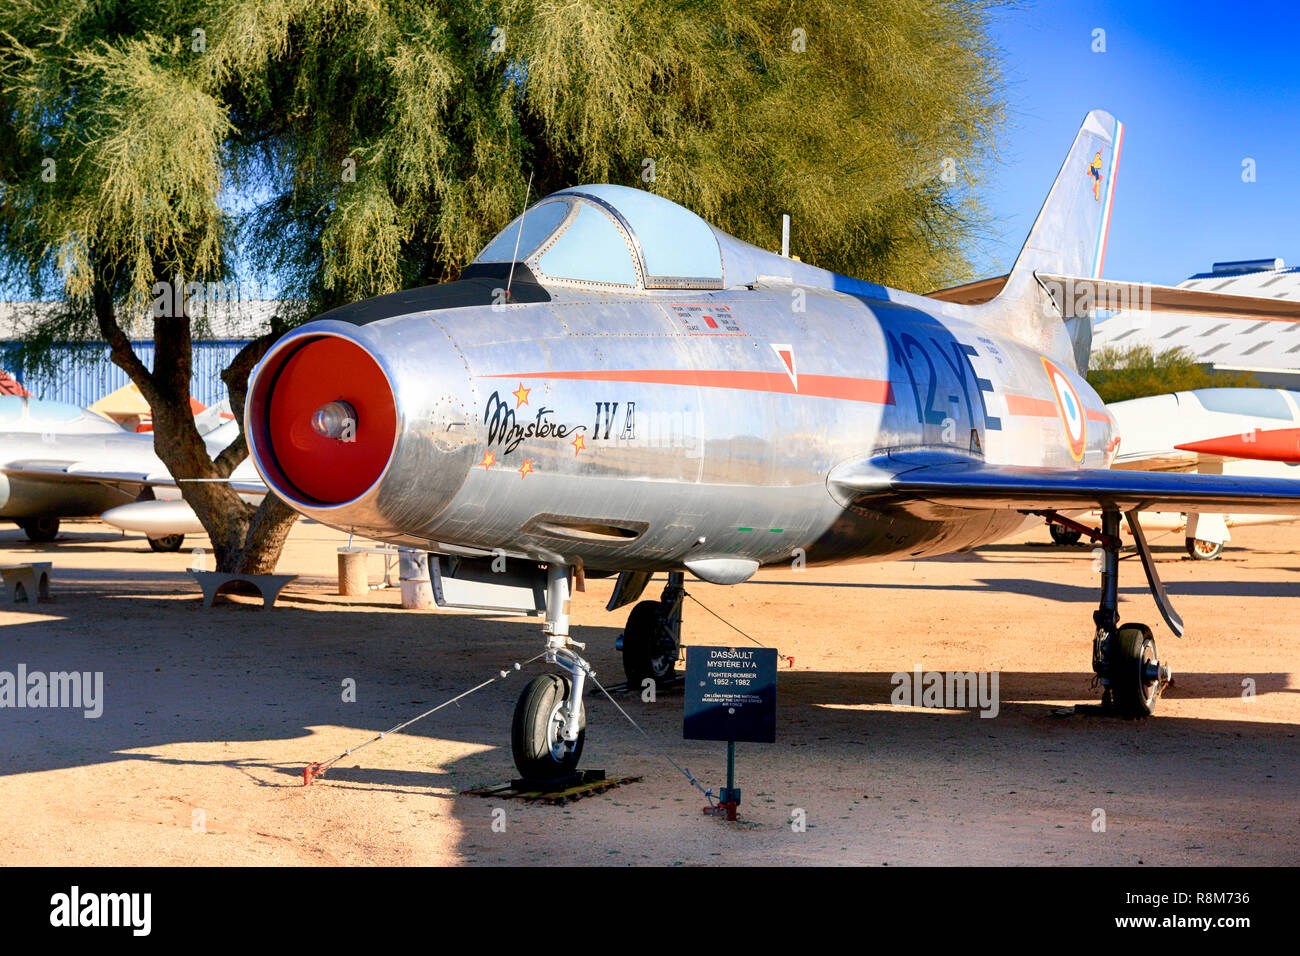 1950s French Dassault Mystere IV fighter plane on display at the Pima Air & Space Museum in Tucson, AZ Stock Photo